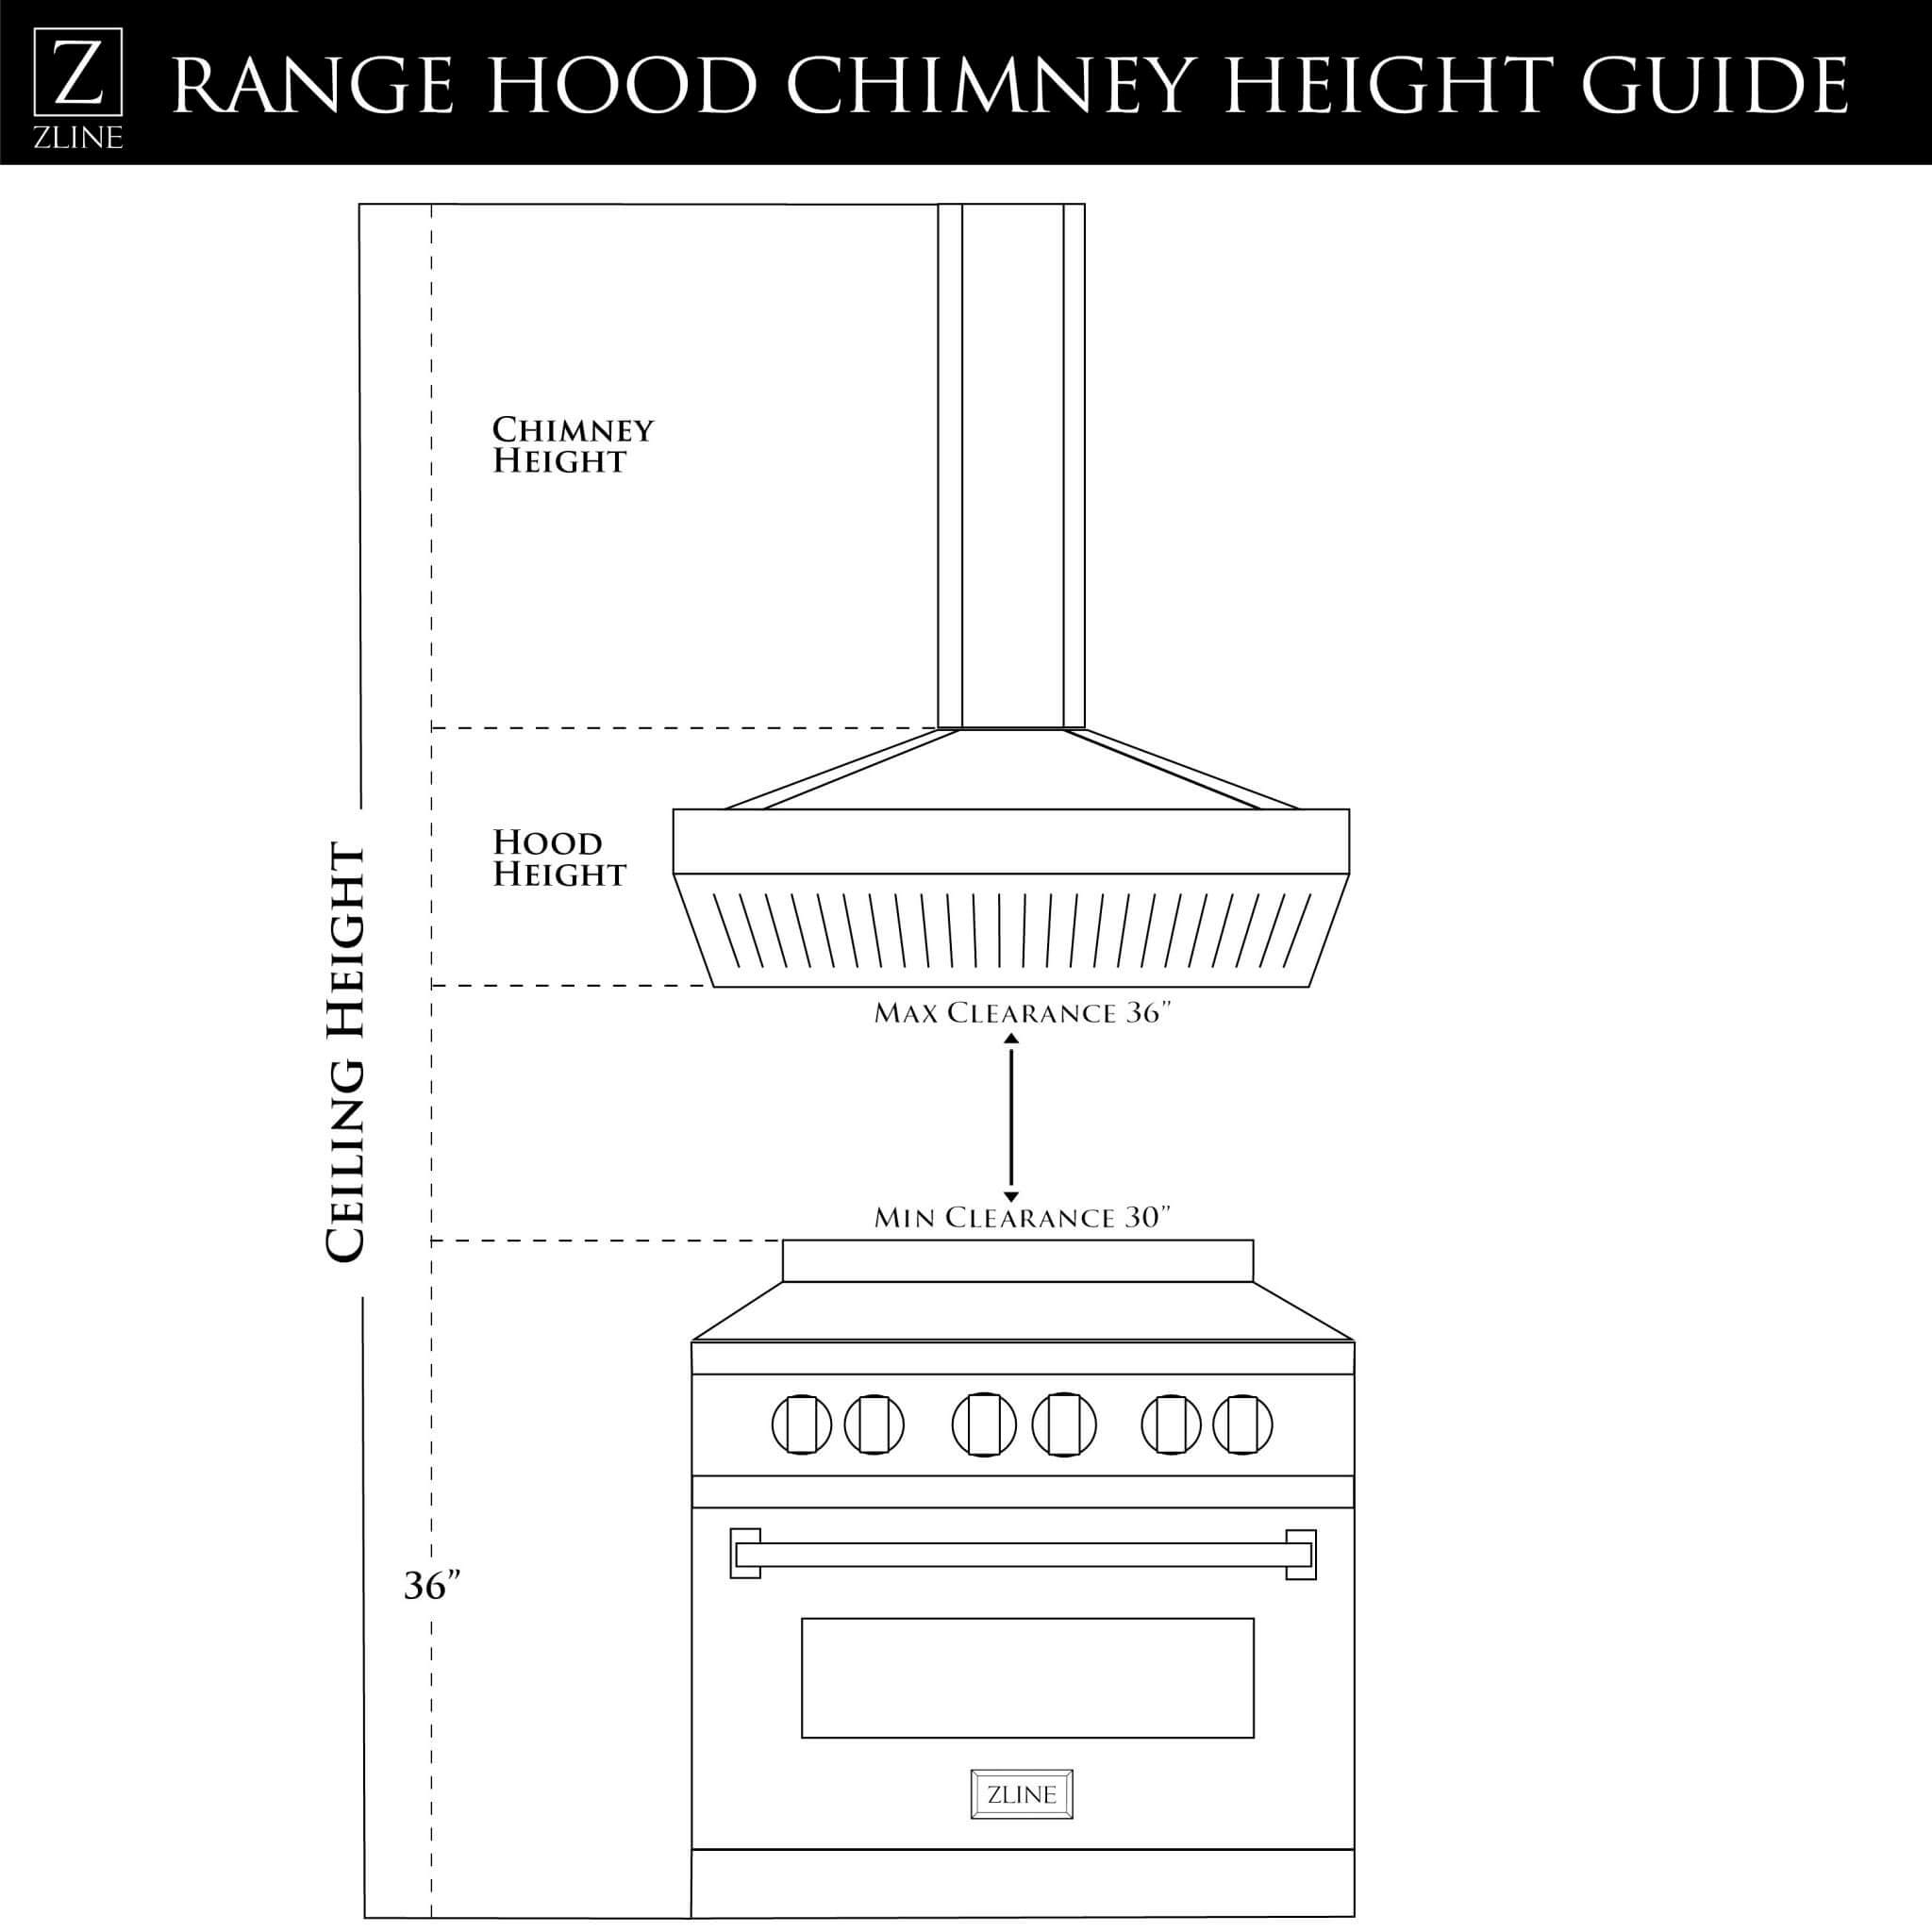 ZLINE Convertible Vent Wall Mount Range Hood in Stainless Steel & Glass (KN4) Chimney Height Guide